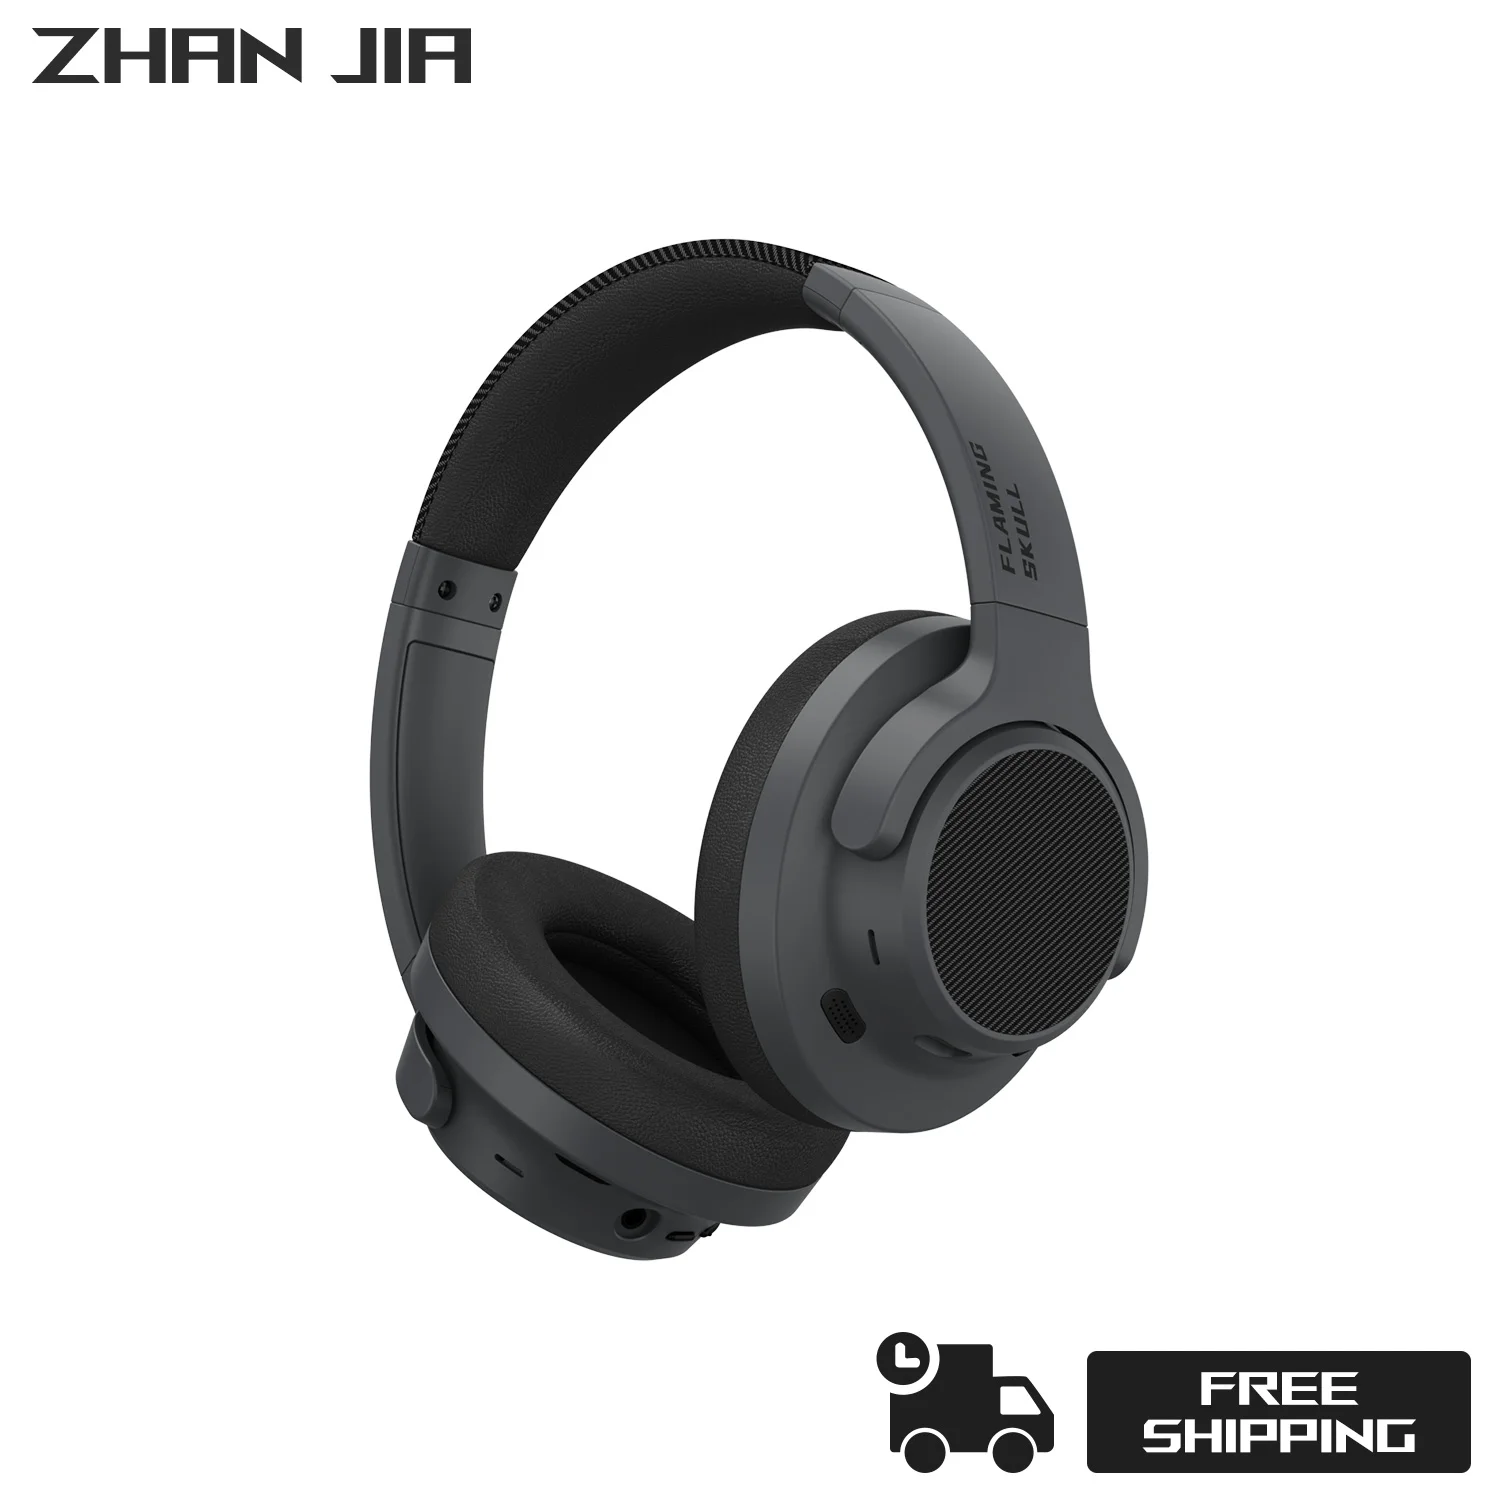 

Over the Ear Stereo Headphone Music Headset with Mic Hybrid Active Noise Cancellation Earphones 2.4G/Wireless/Cable Headsets